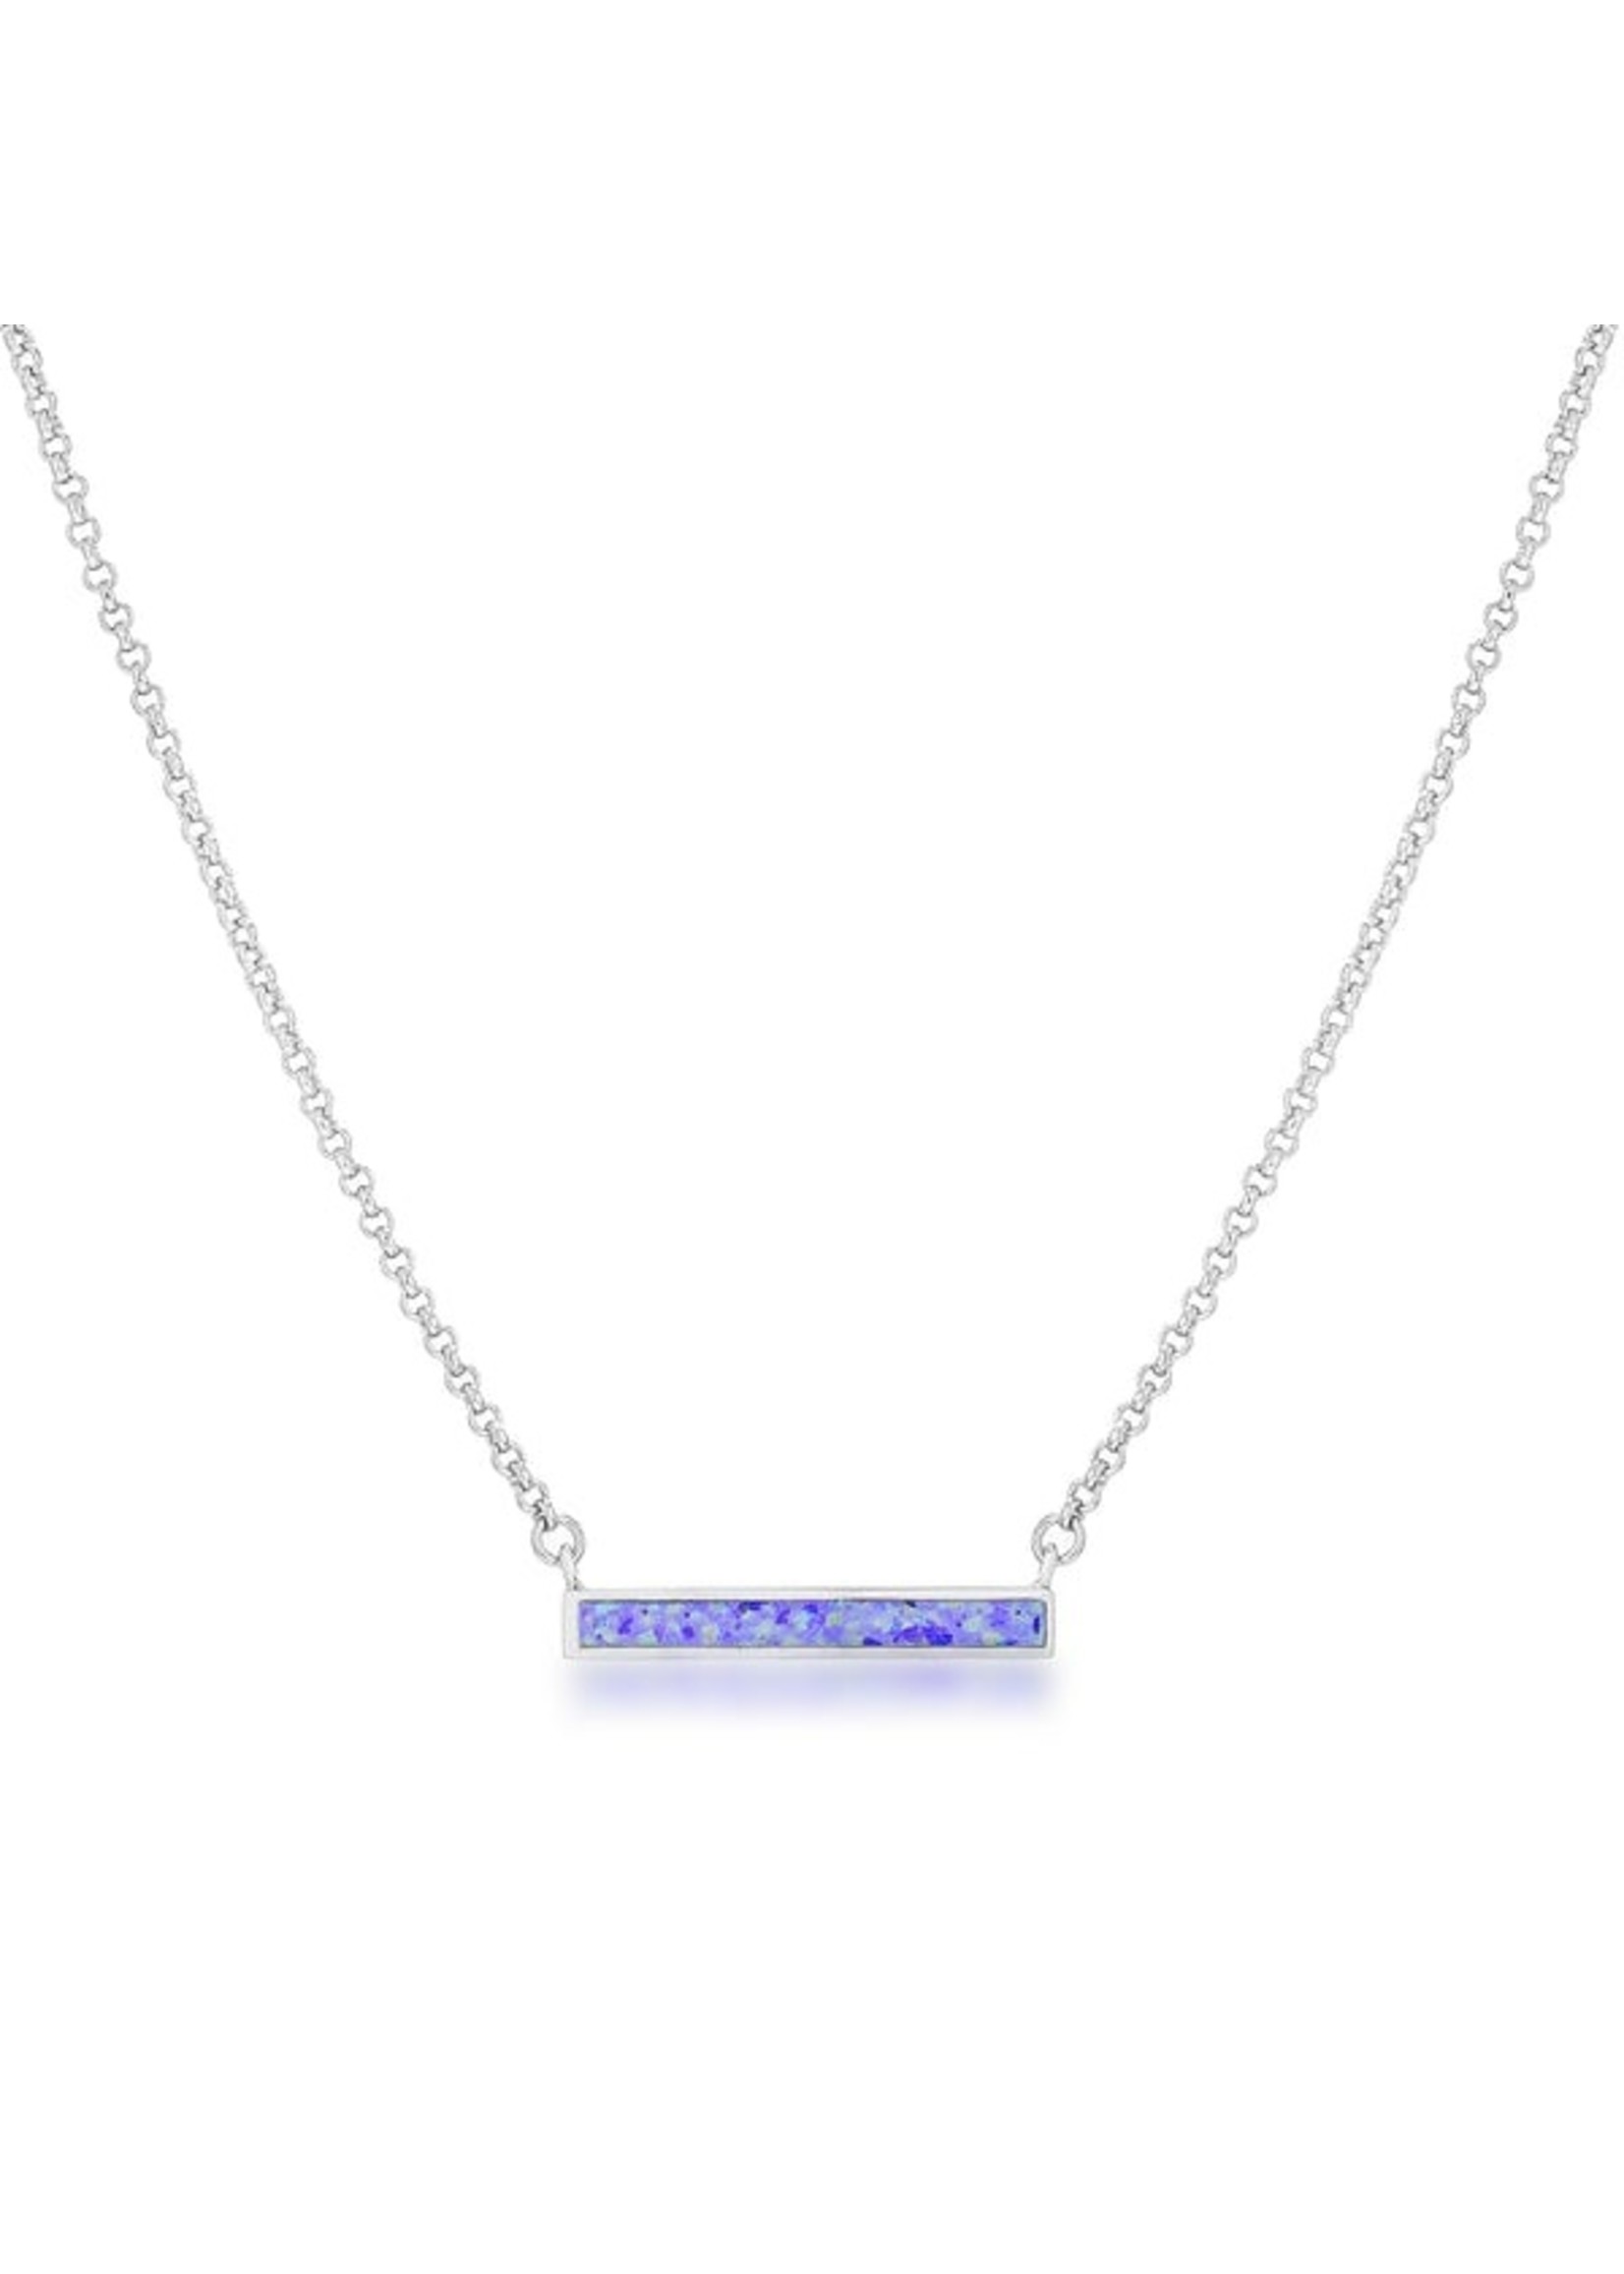 KDesign Regal Collection Rhodium Plated Bar Necklace